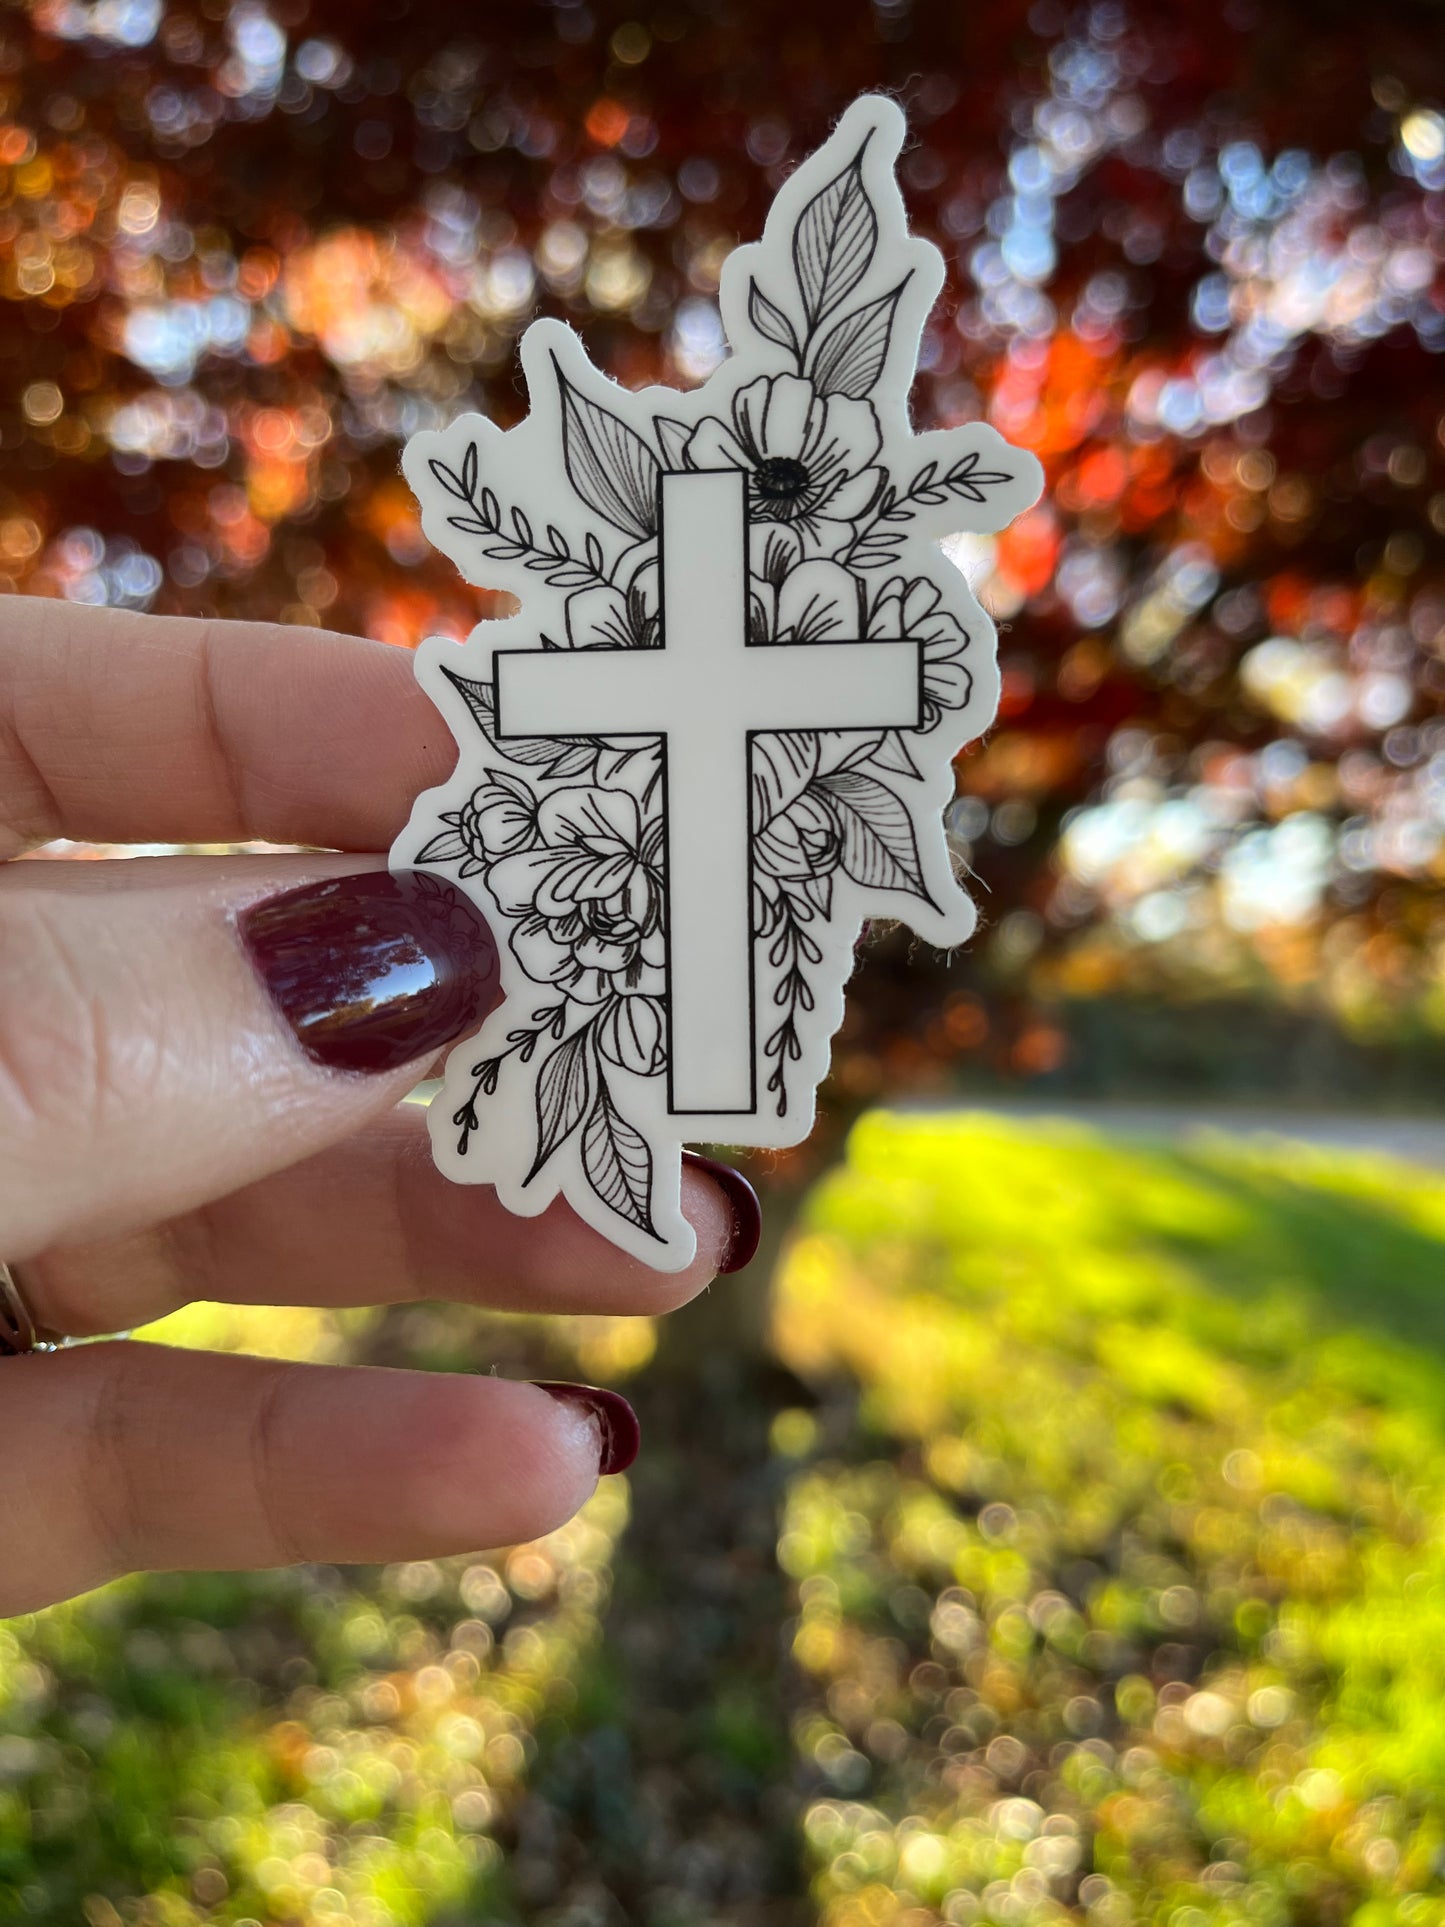 CROSS WITH PEONIES STICKER - black and white